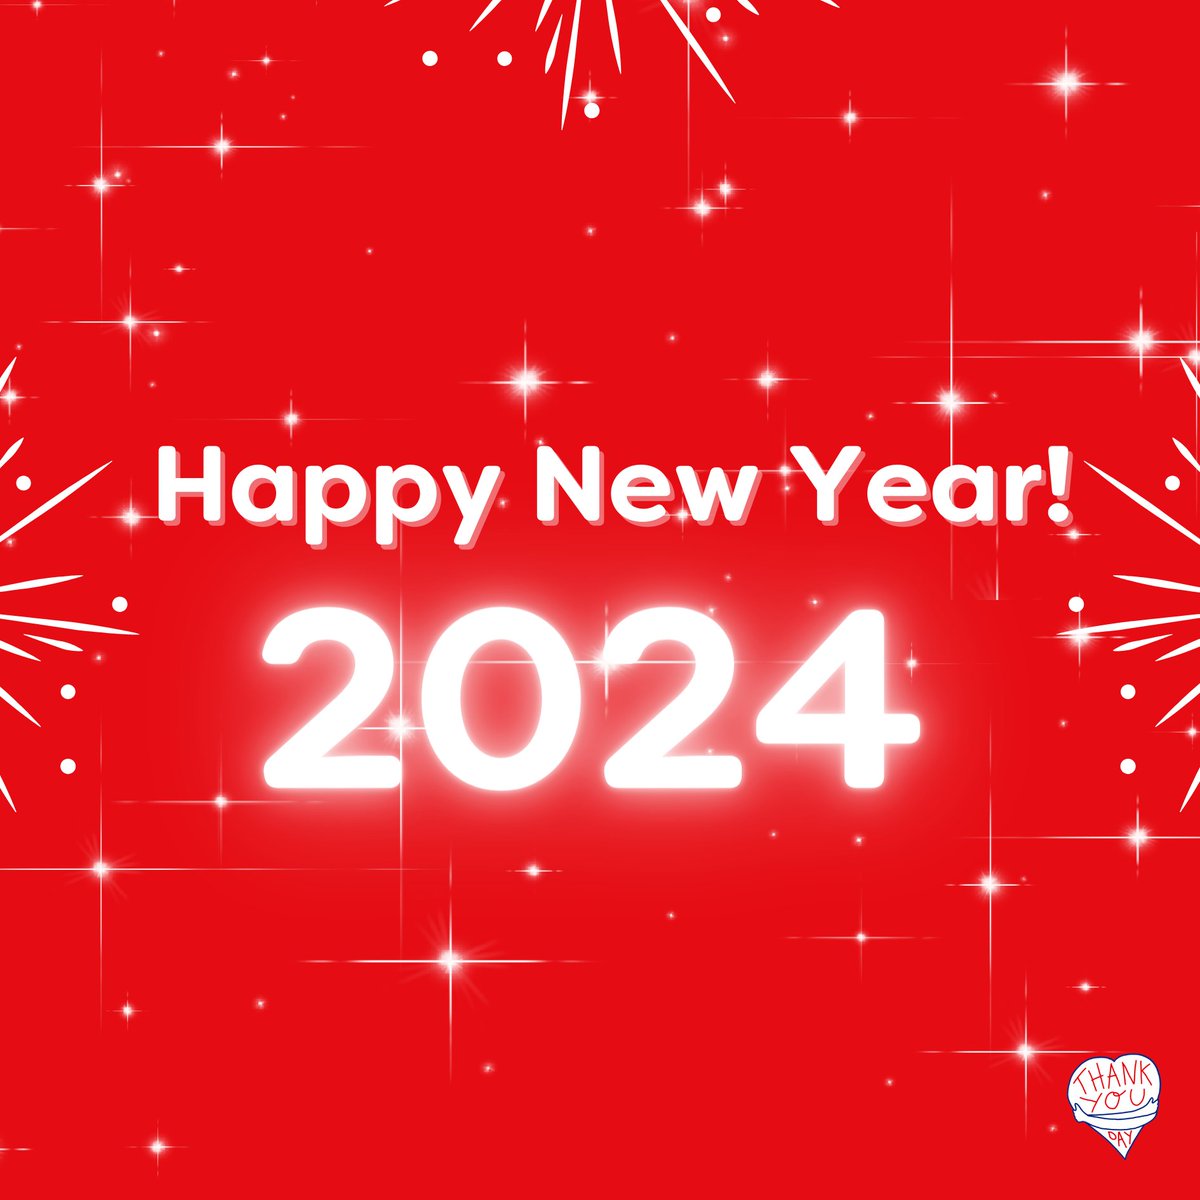 We wish you all a very Happy New Year! We are immensely grateful for your support and enthusiasm and we can't wait to see what 2024 has in store 🎉